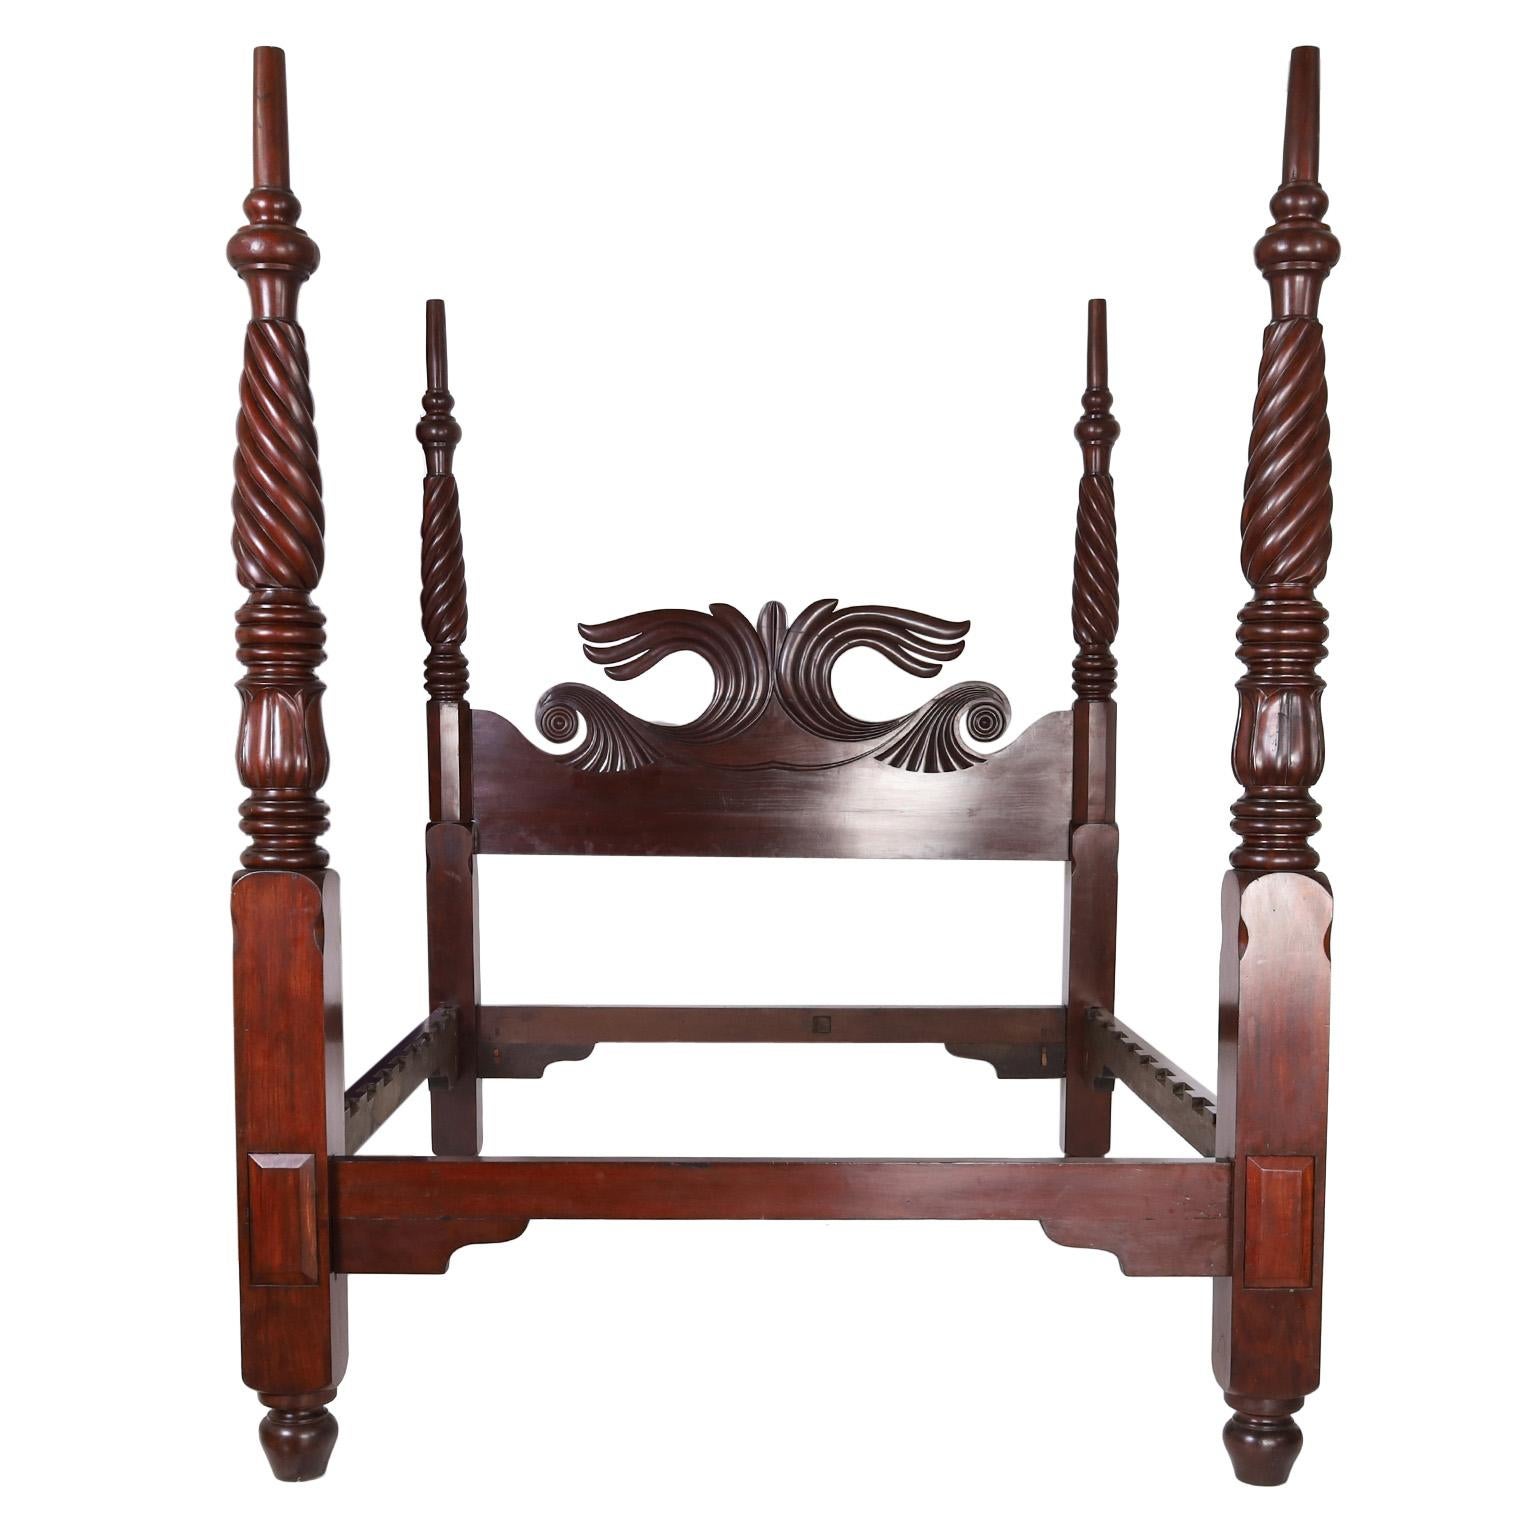 Rare and remarkable 19th century West Indies Queen size plantation poster bed handcrafted in rosewood having a carved headboard with an ocean wave motif and four turned, twisted and carved posts. Best of the genre.